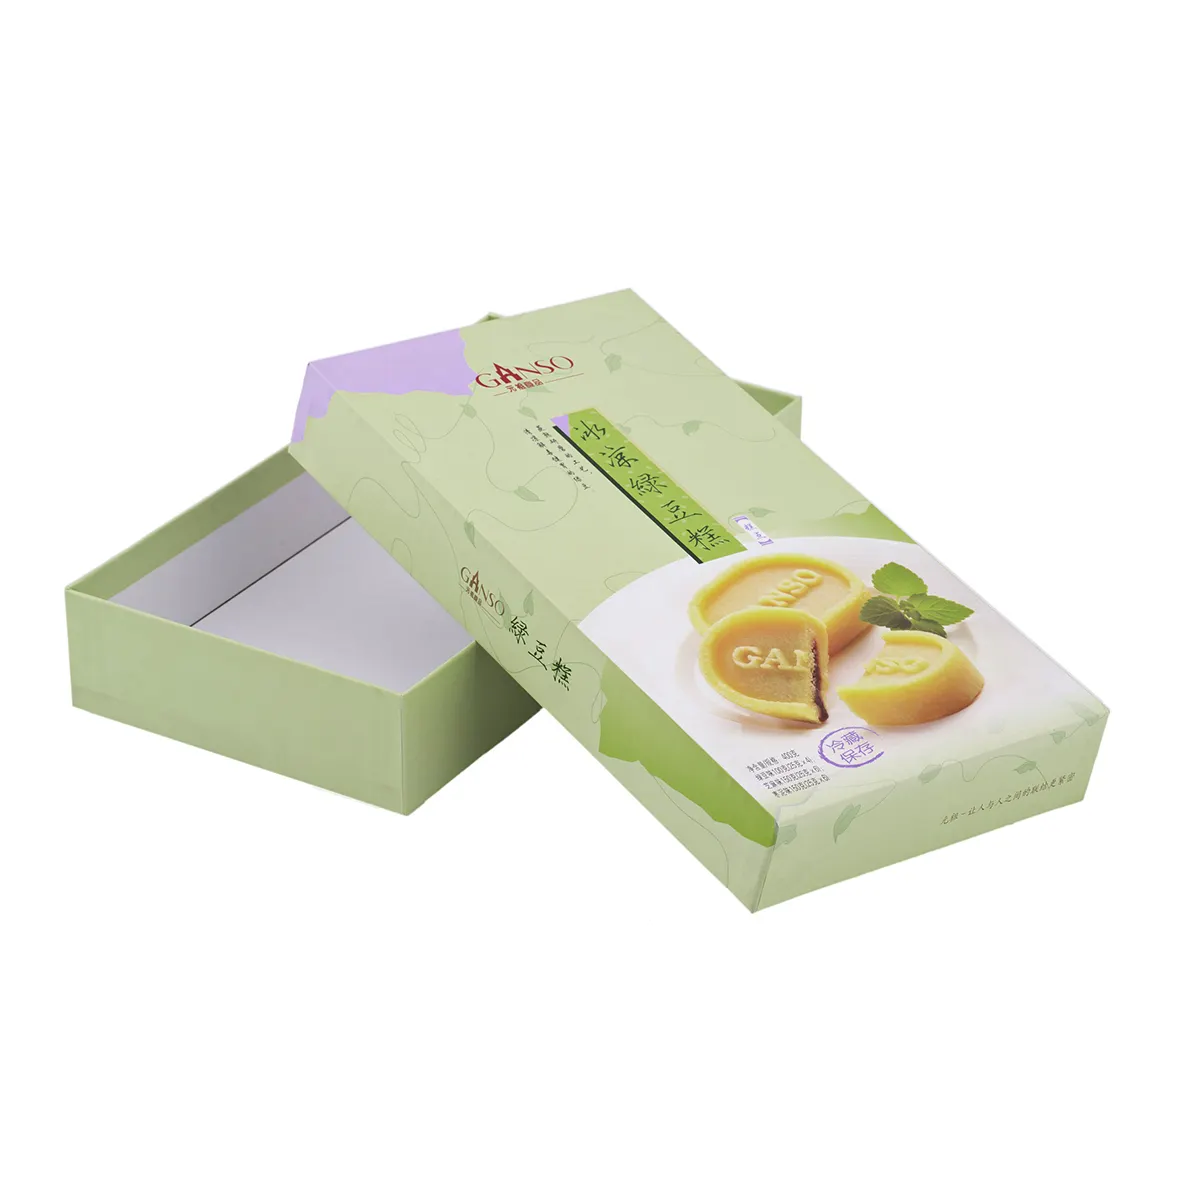 Paper Bakery Cake Boxes Single Pastry Box Packaging with Clear Display Window Donut Mini Cake Pie Slice Dessert Treat Box